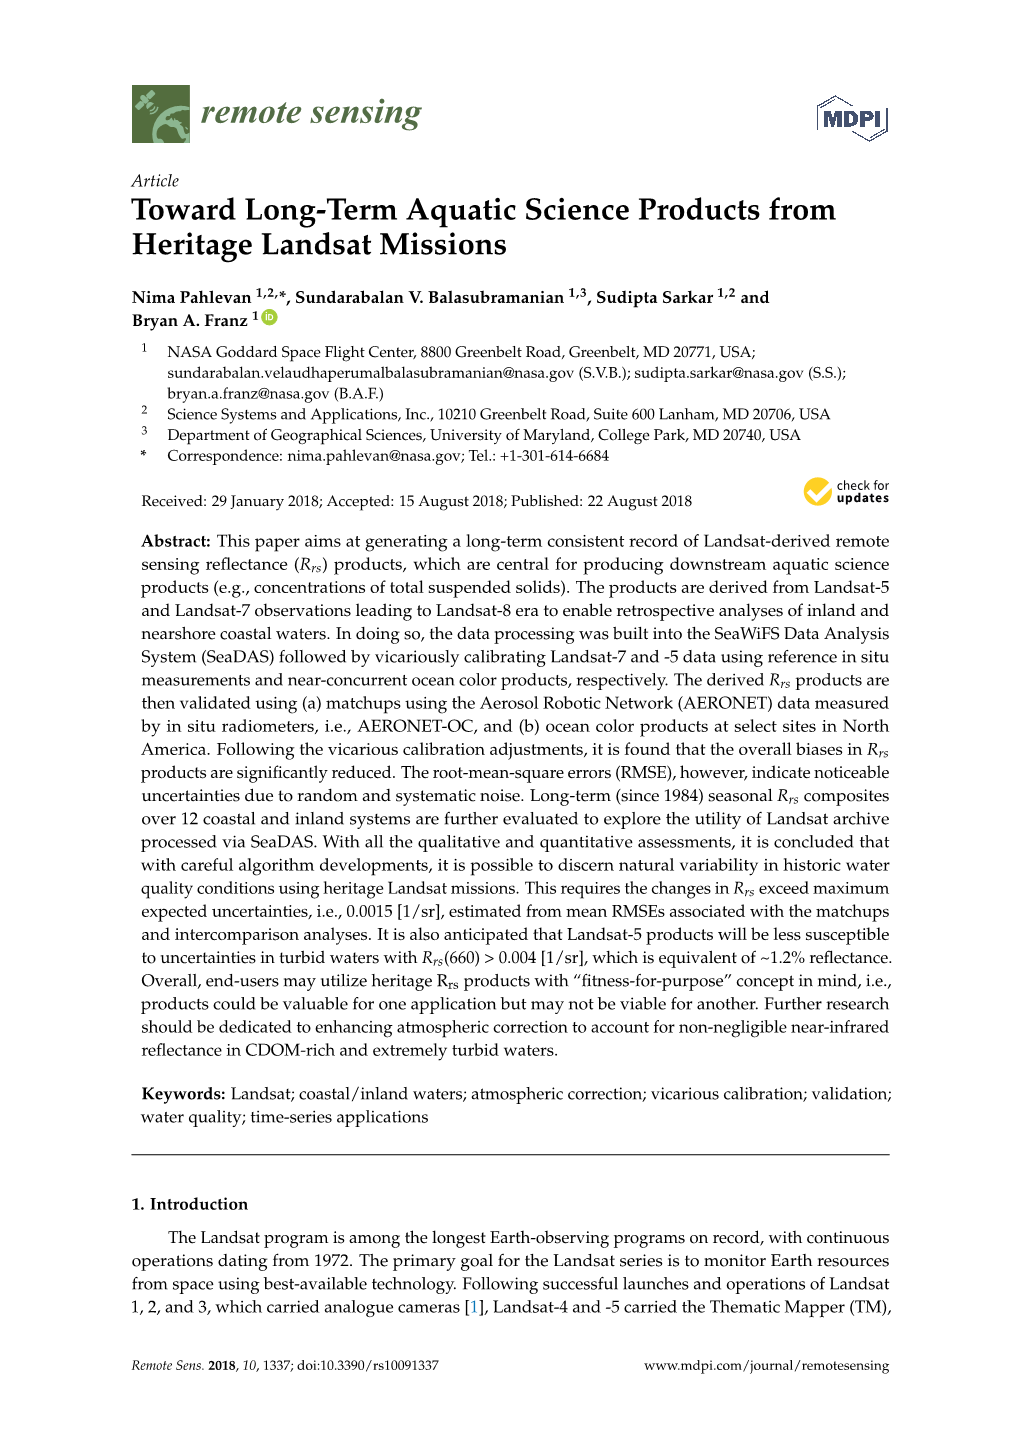 Toward Long-Term Aquatic Science Products from Heritage Landsat Missions